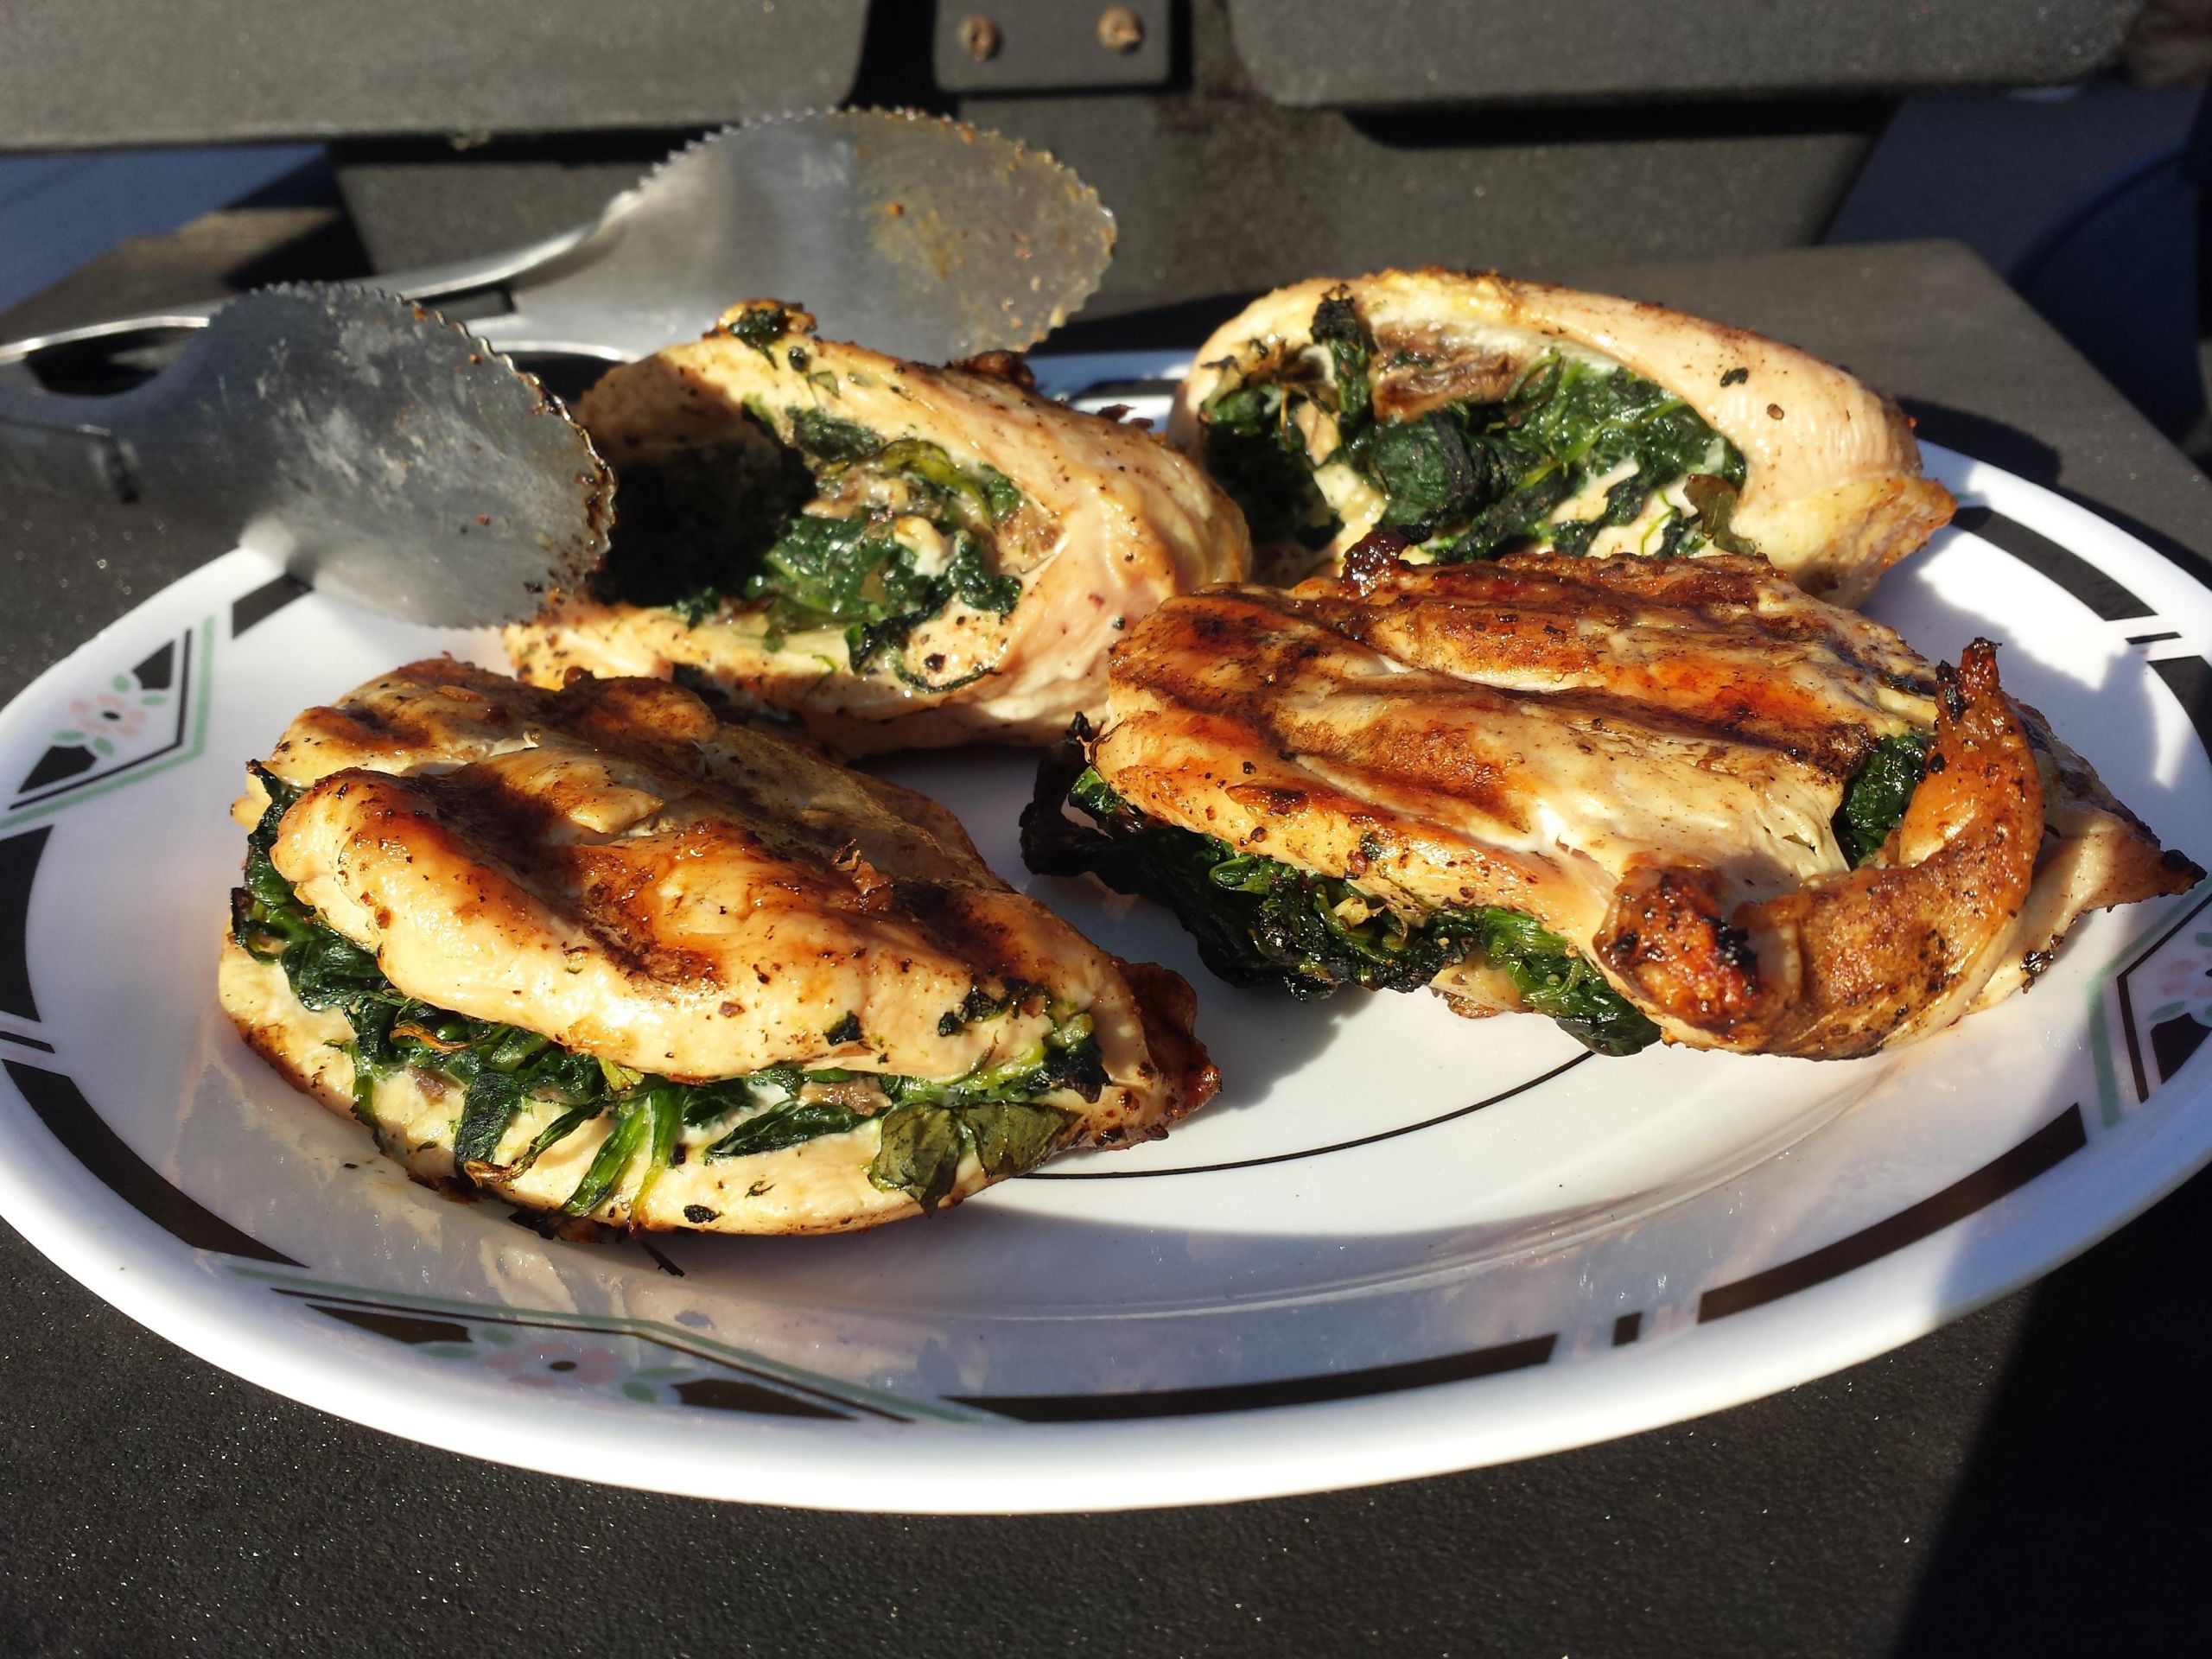 Spinach Mushroom Stuffed Chicken
 [4128x3096] Spinach and mushroom stuffed chicken breast on